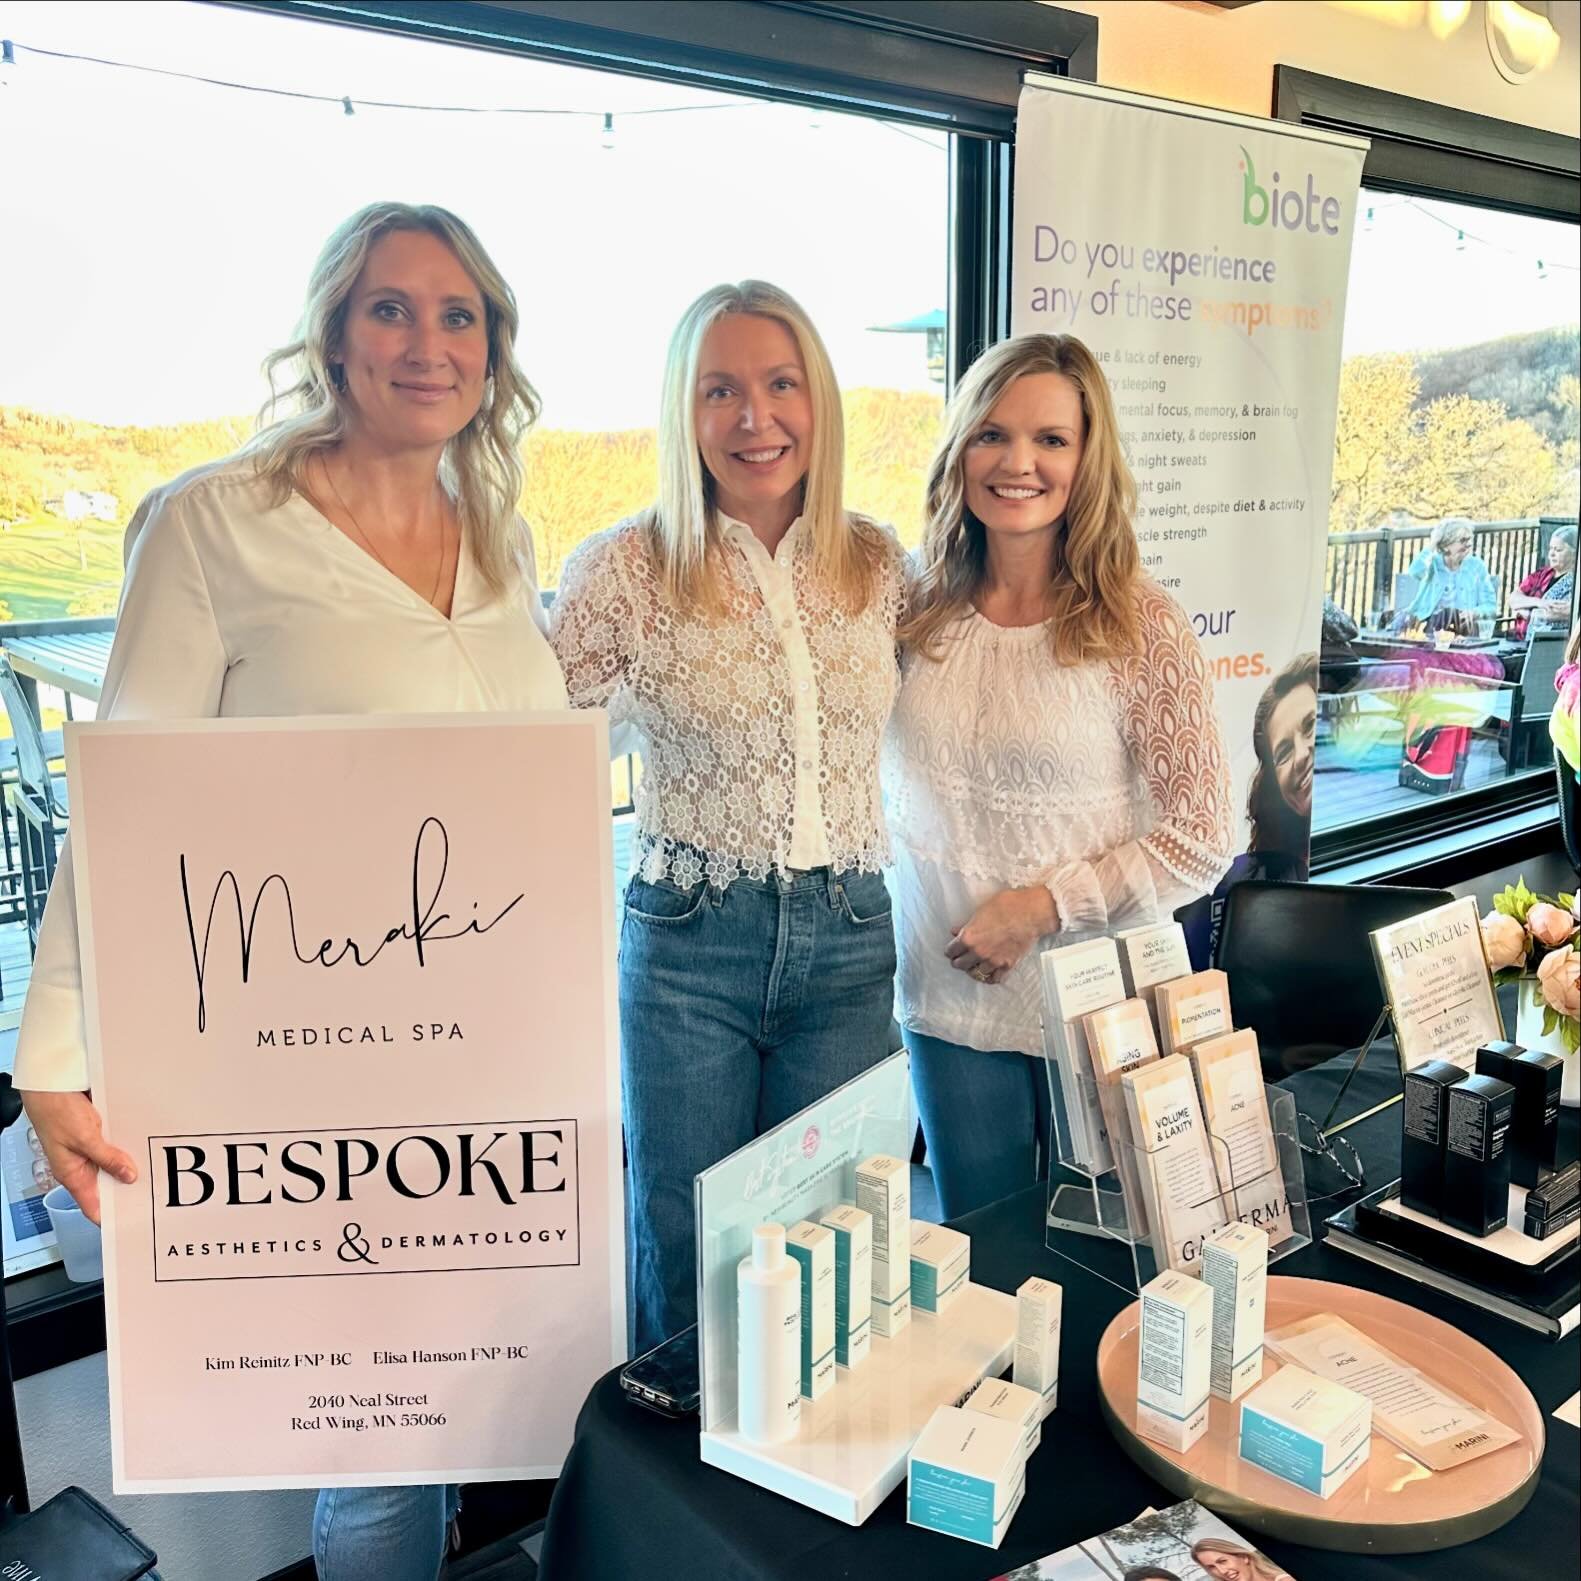 We had the best time at the Women and Wine event. So lovely to meet all of you who came out and we always enjoy educating you on our services. We can&rsquo;t wait to see you at the med spa for your dermatological, aesthetic and hormone replacement ne